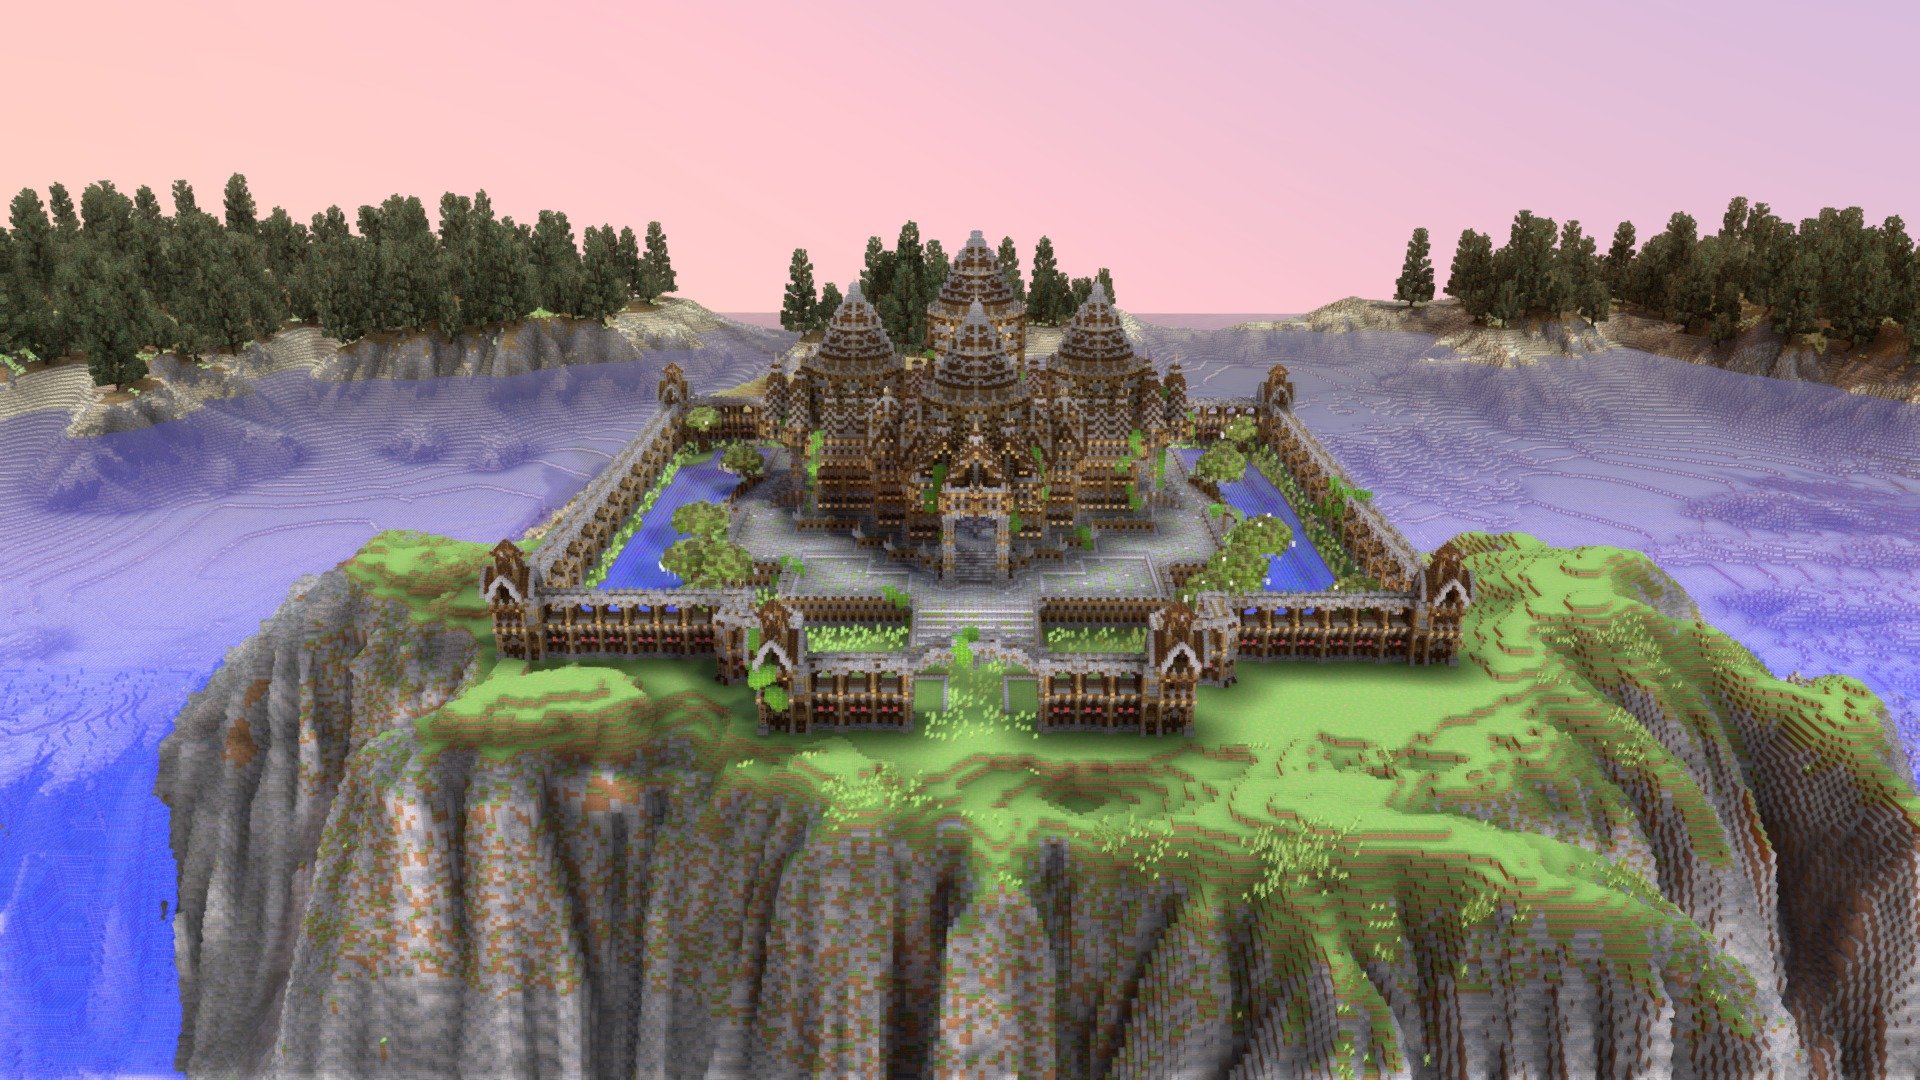 Minecraft gamer builds awesome jungle temple! See time-lapse